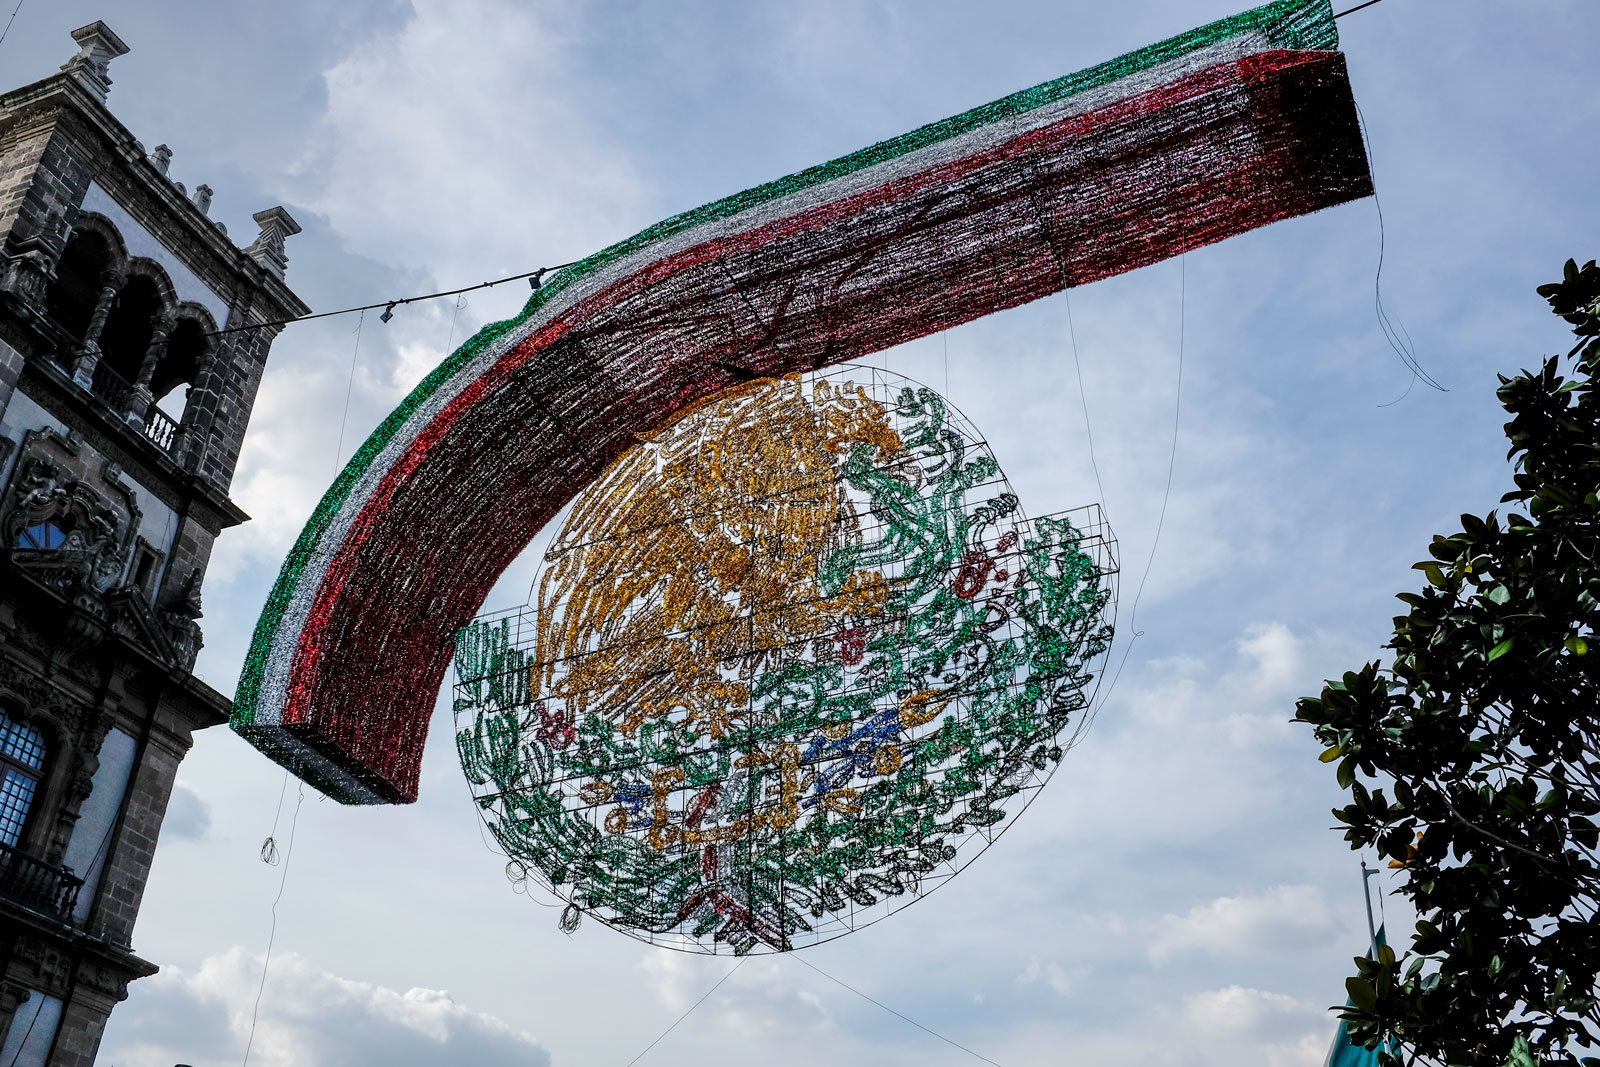 A crafted emblem of the Mexico flag hangs over a street